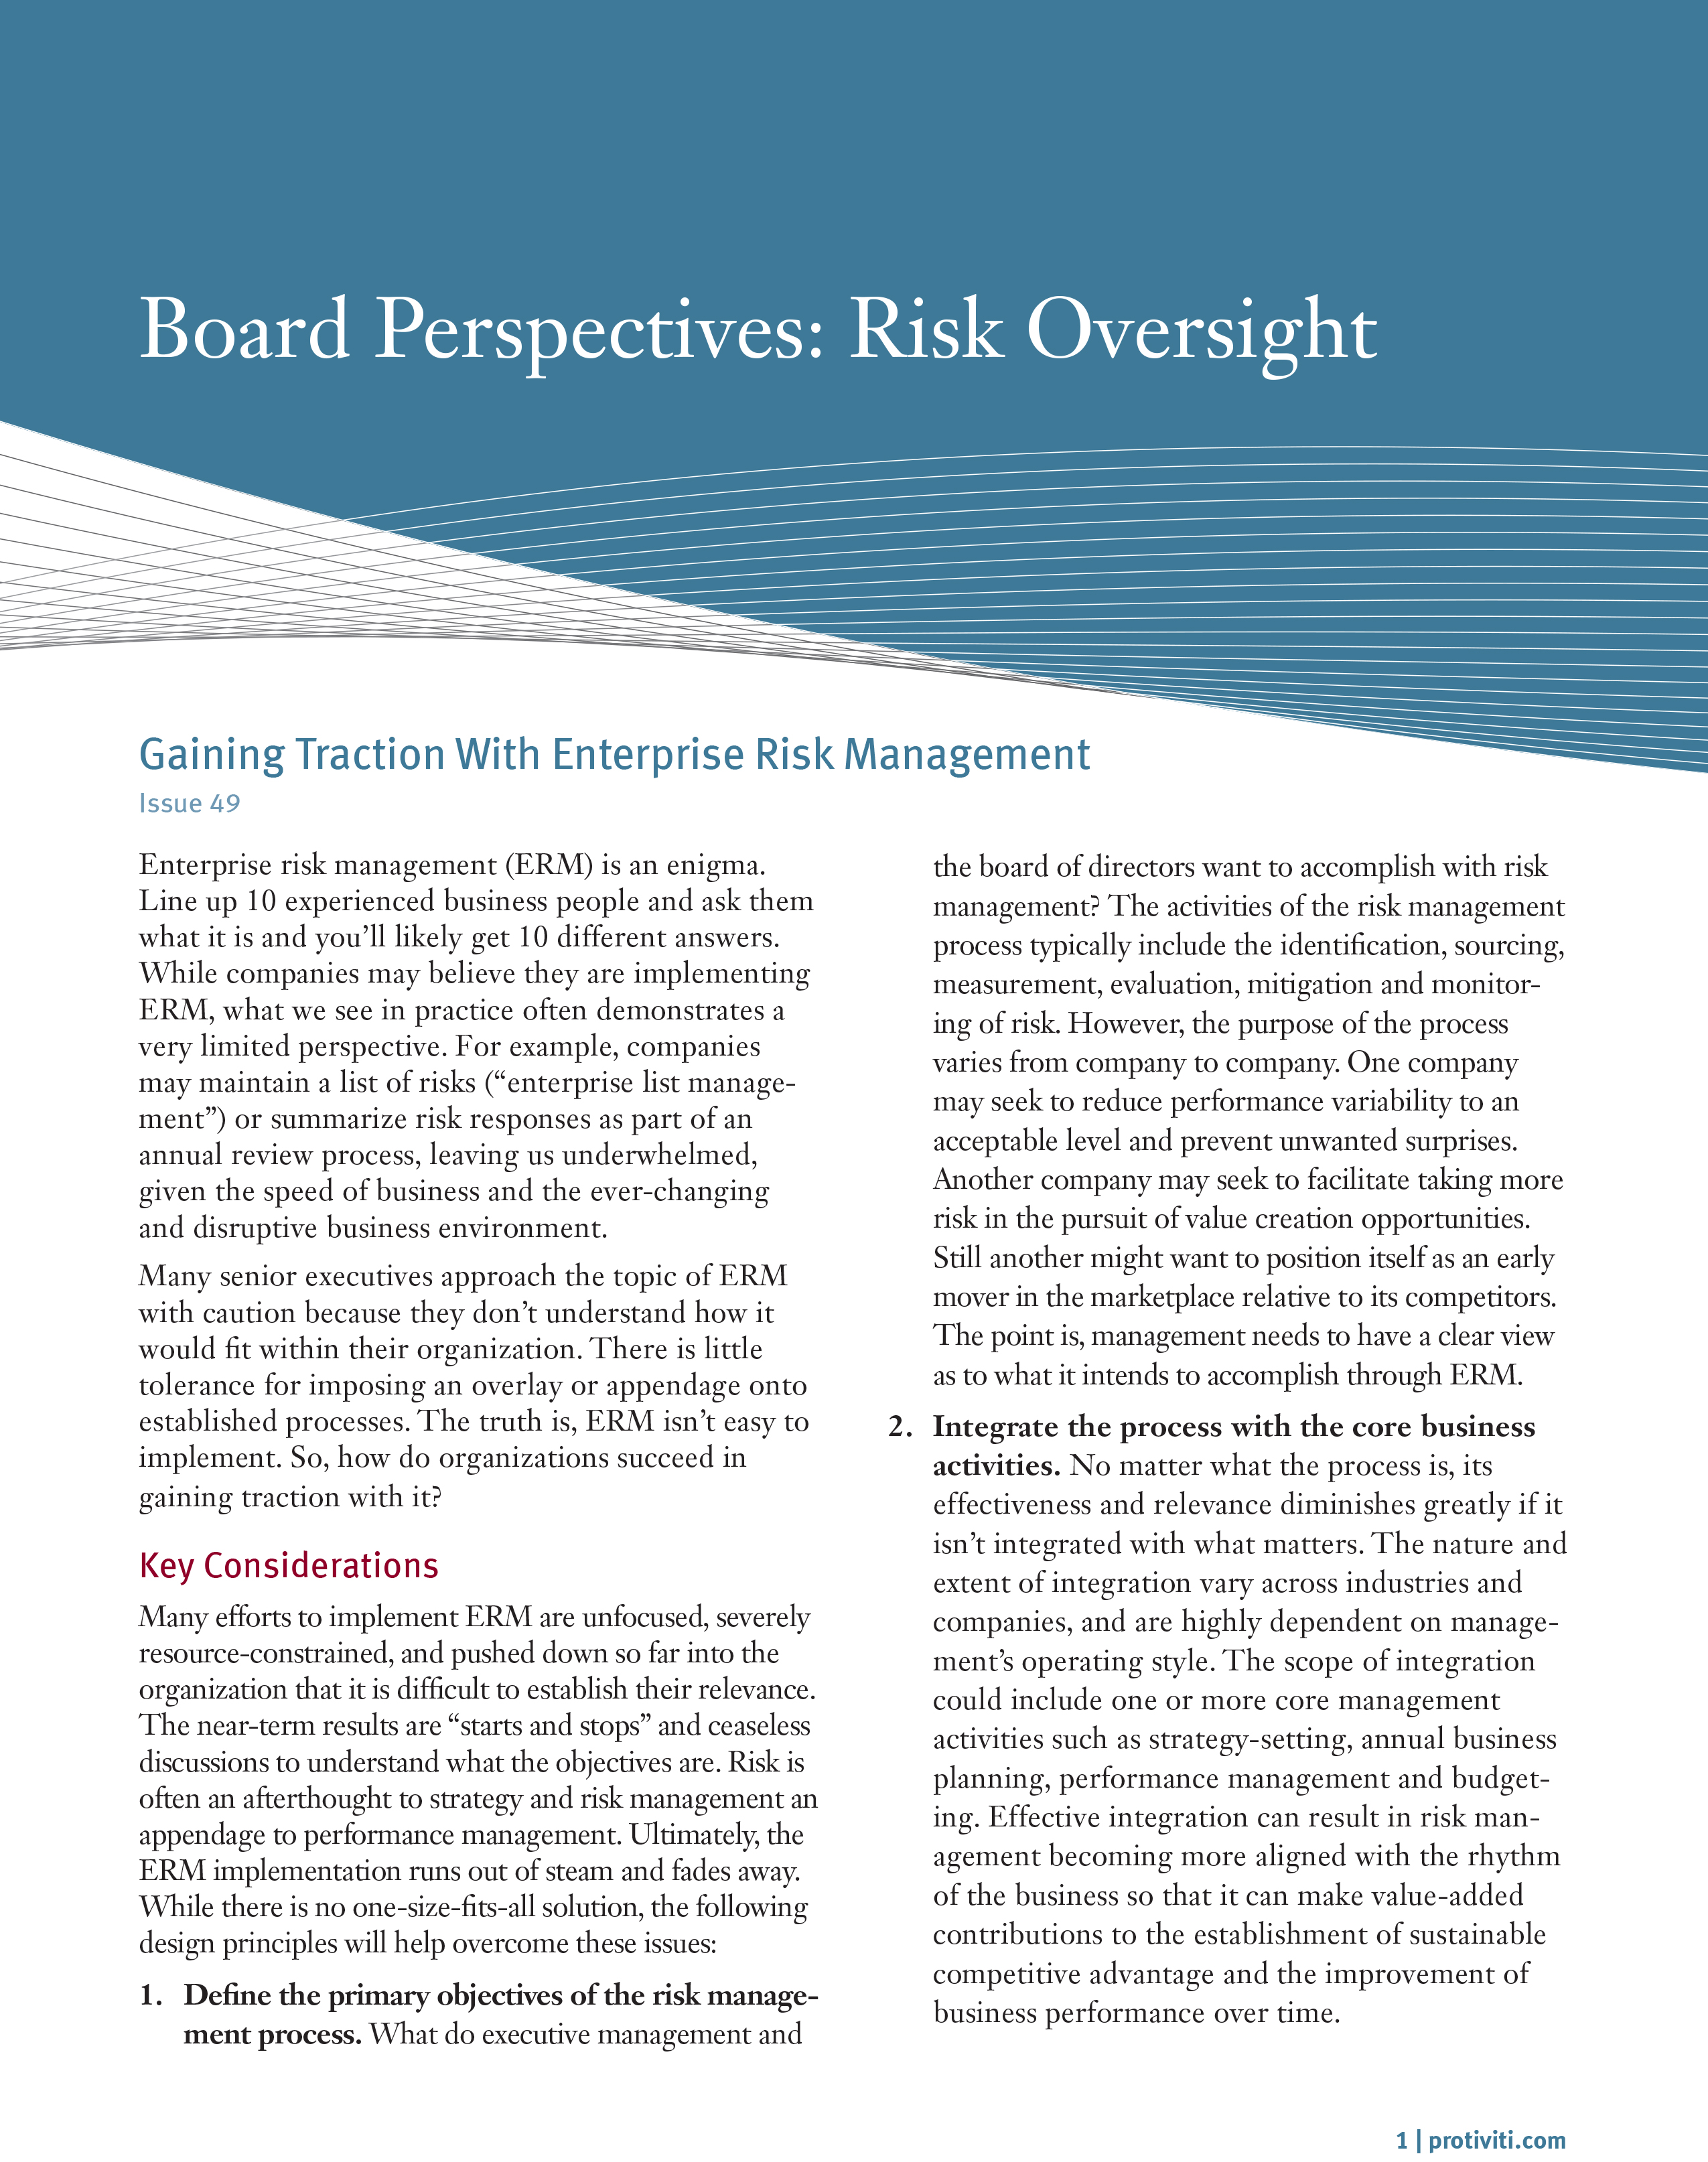 Screenshot of the first page of Gaining Traction With Enterprise Risk Management